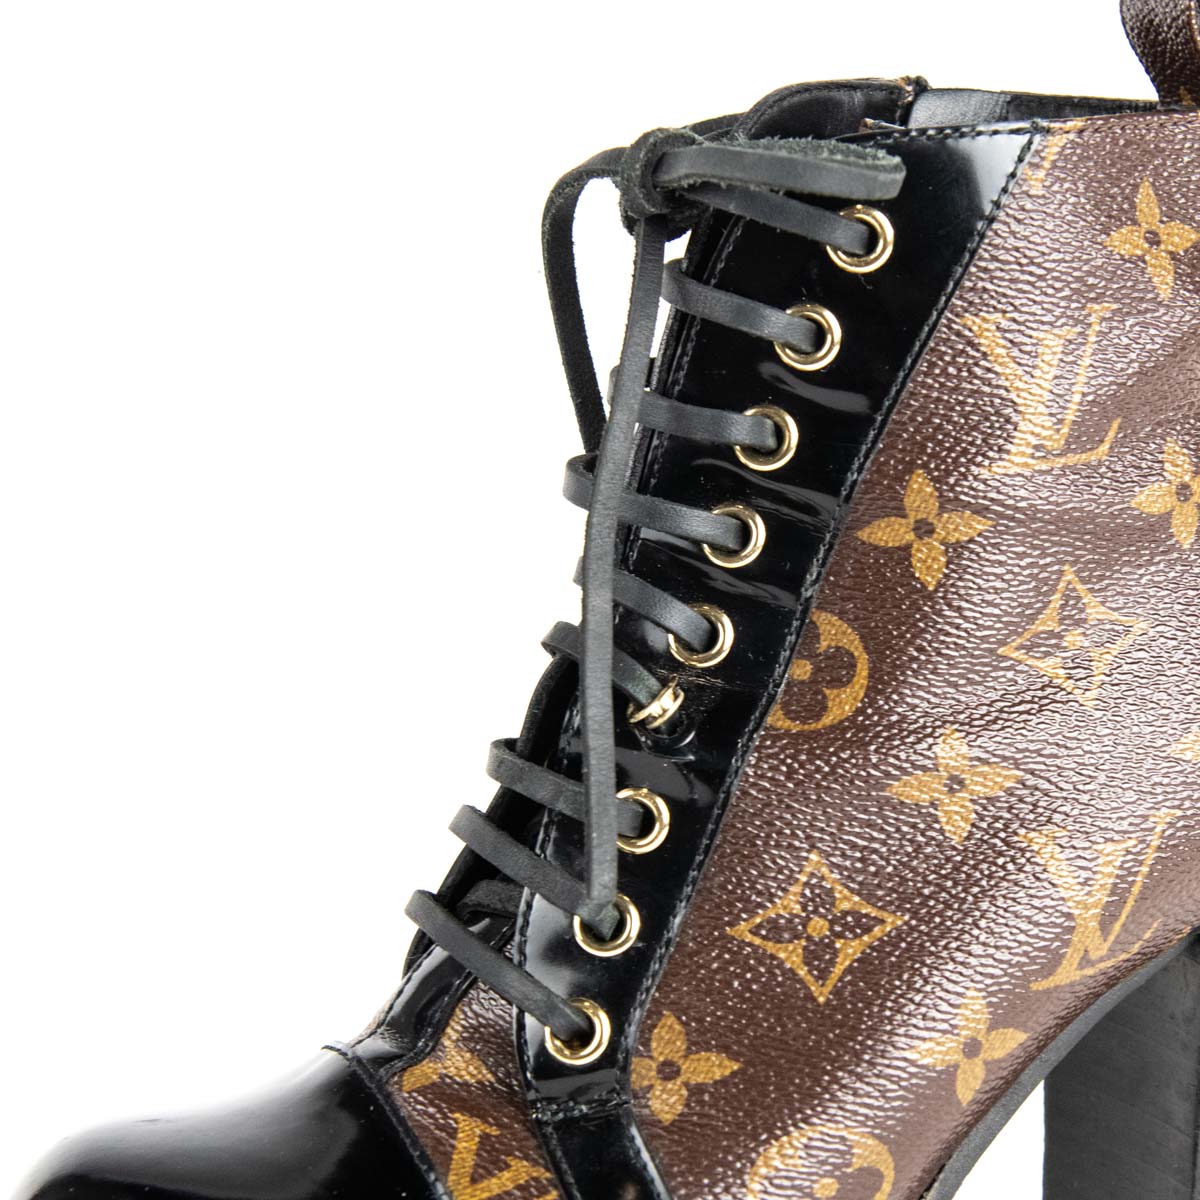 Louis Vuitton Star Trail Ankle Leather Boots Size EU 39.5 US 9.5 In Box  &Receipt